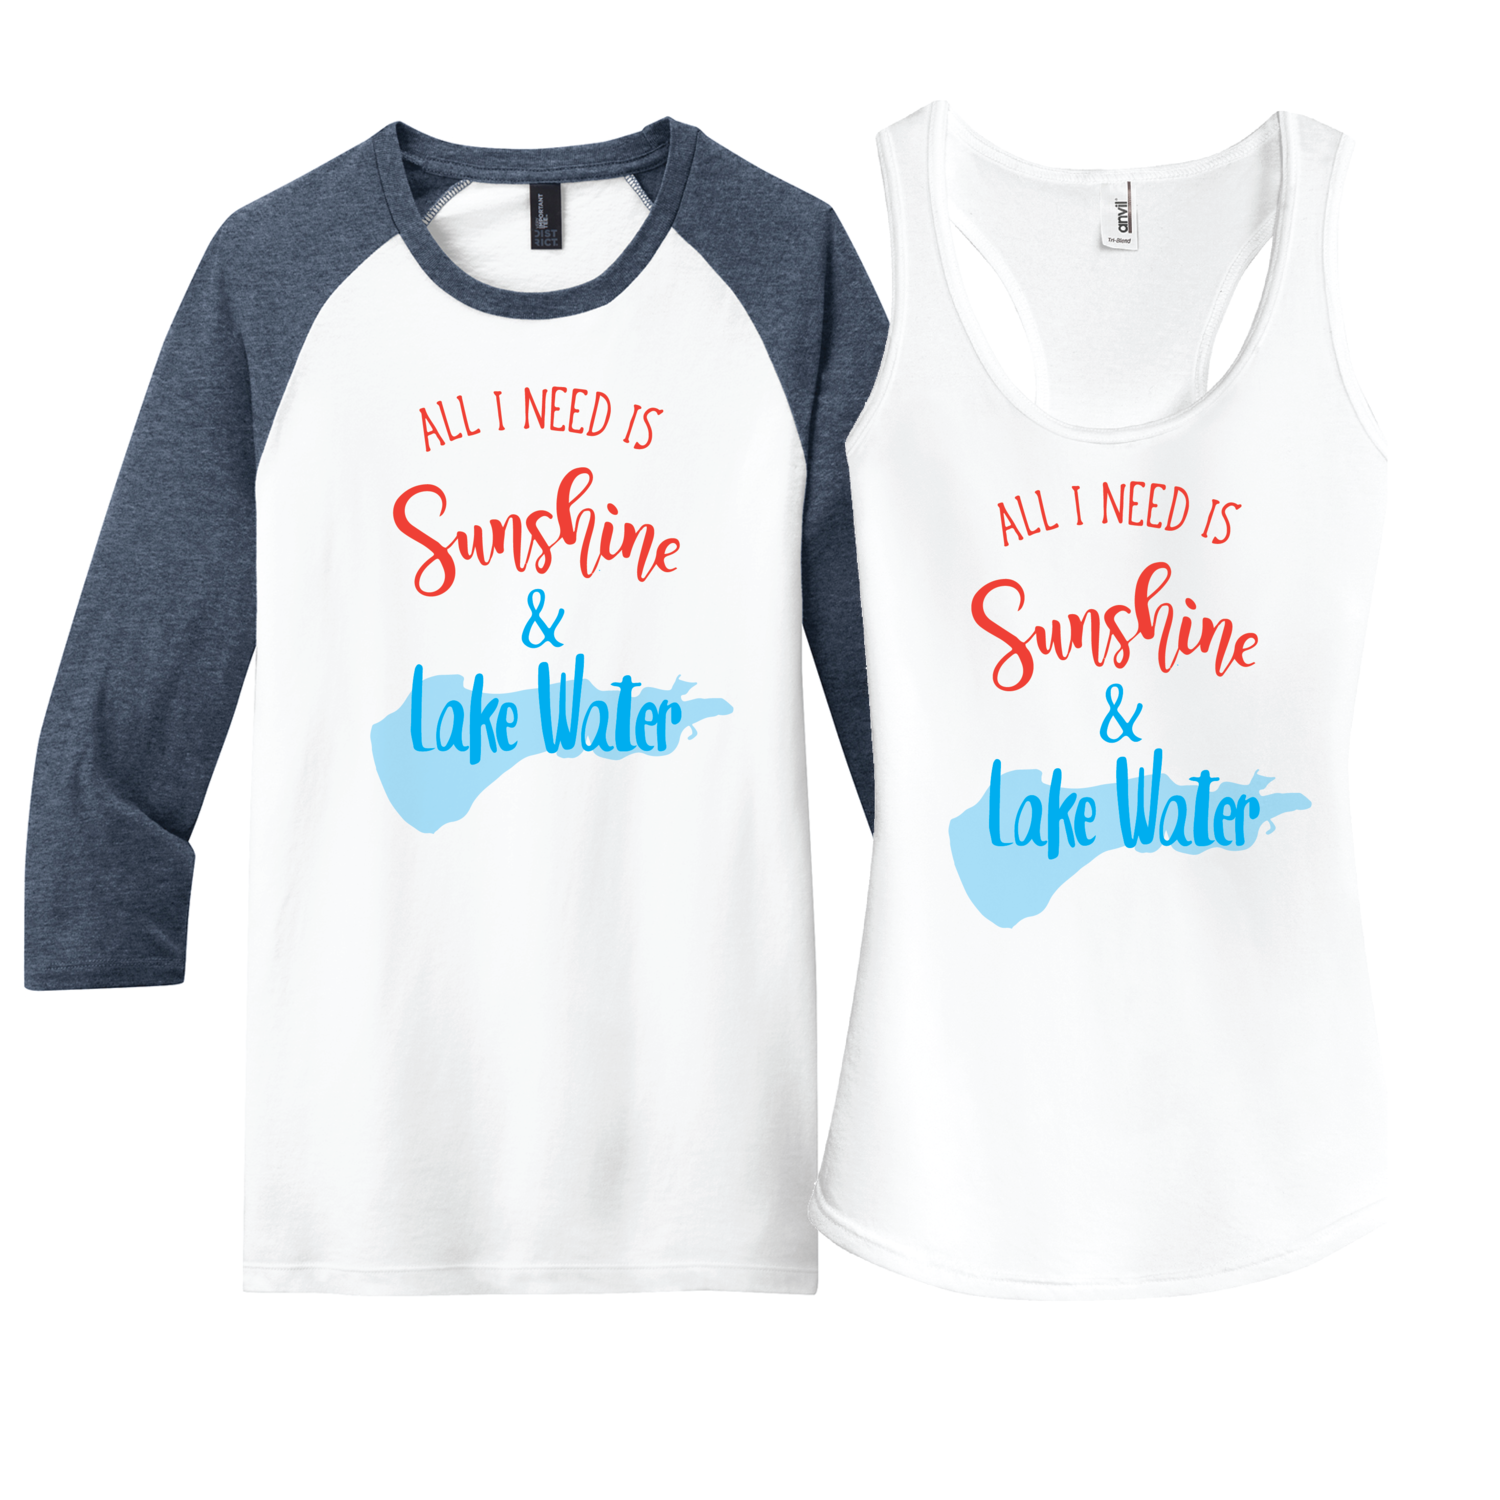 All I Need is Sunshine & Lake Water - customize it for your lake